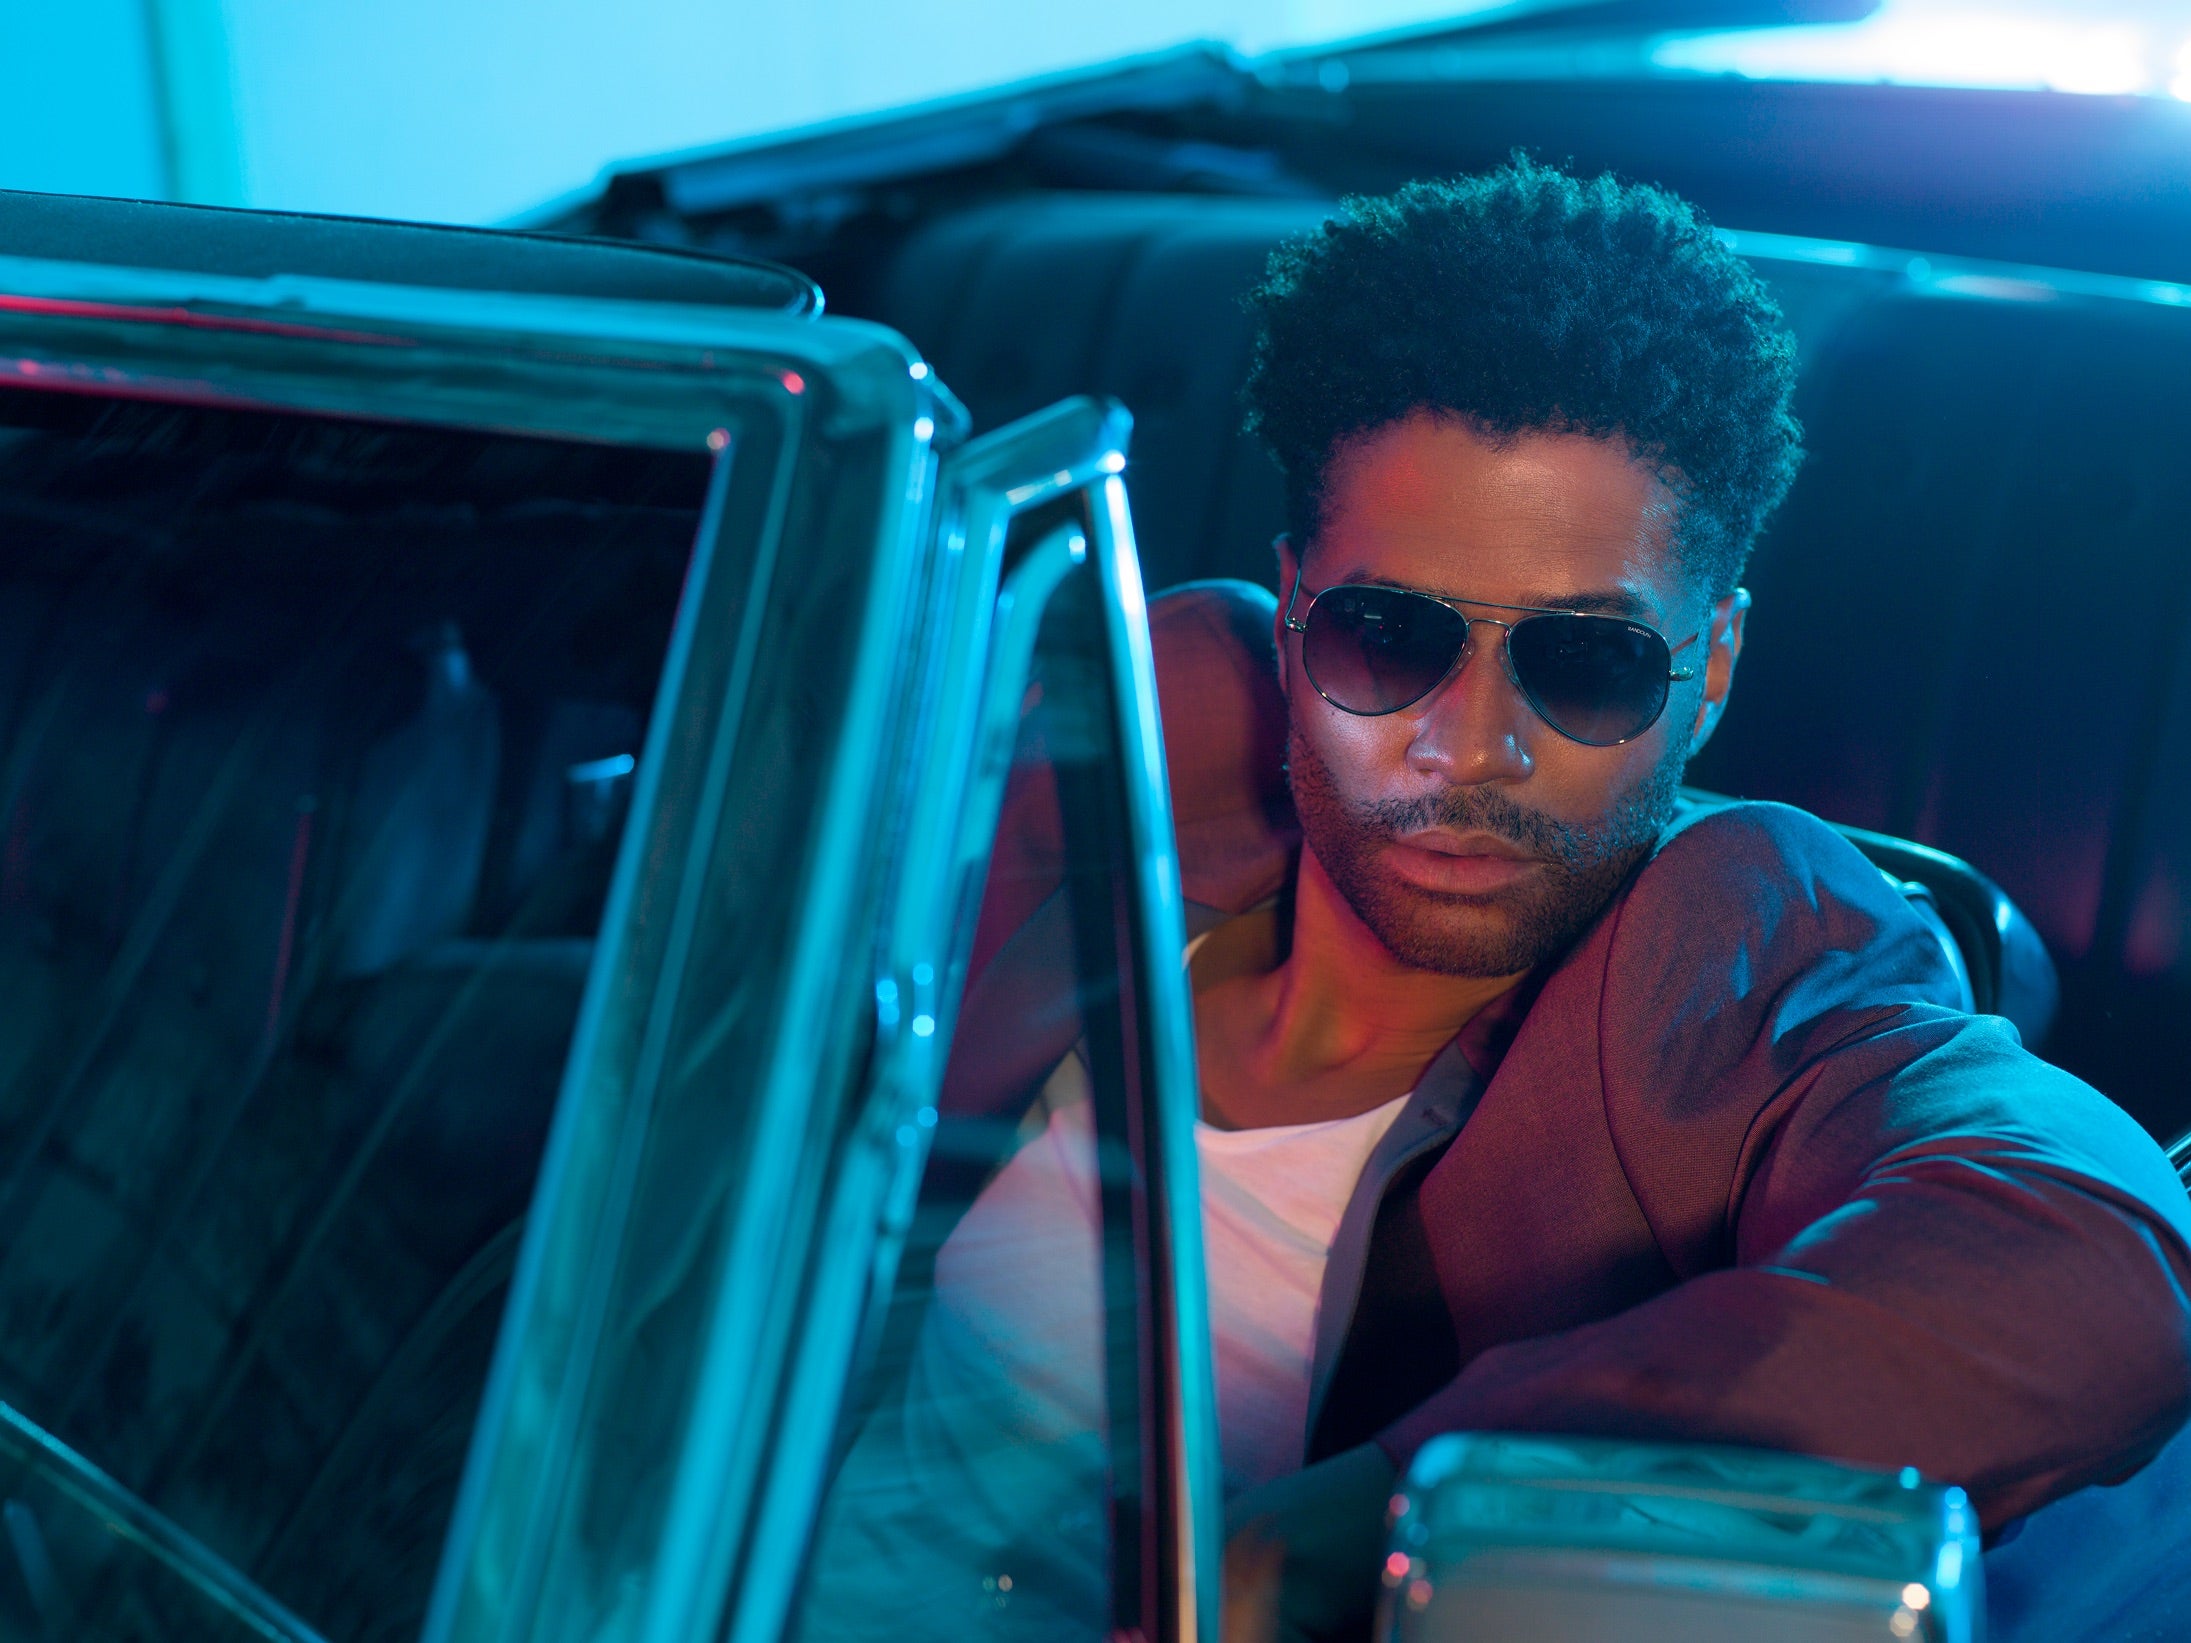 Exclusive Premiere: Eric Benet Serenades His Baby Girl With New Song, "Never Be The Same (Luna's Lullaby)"
